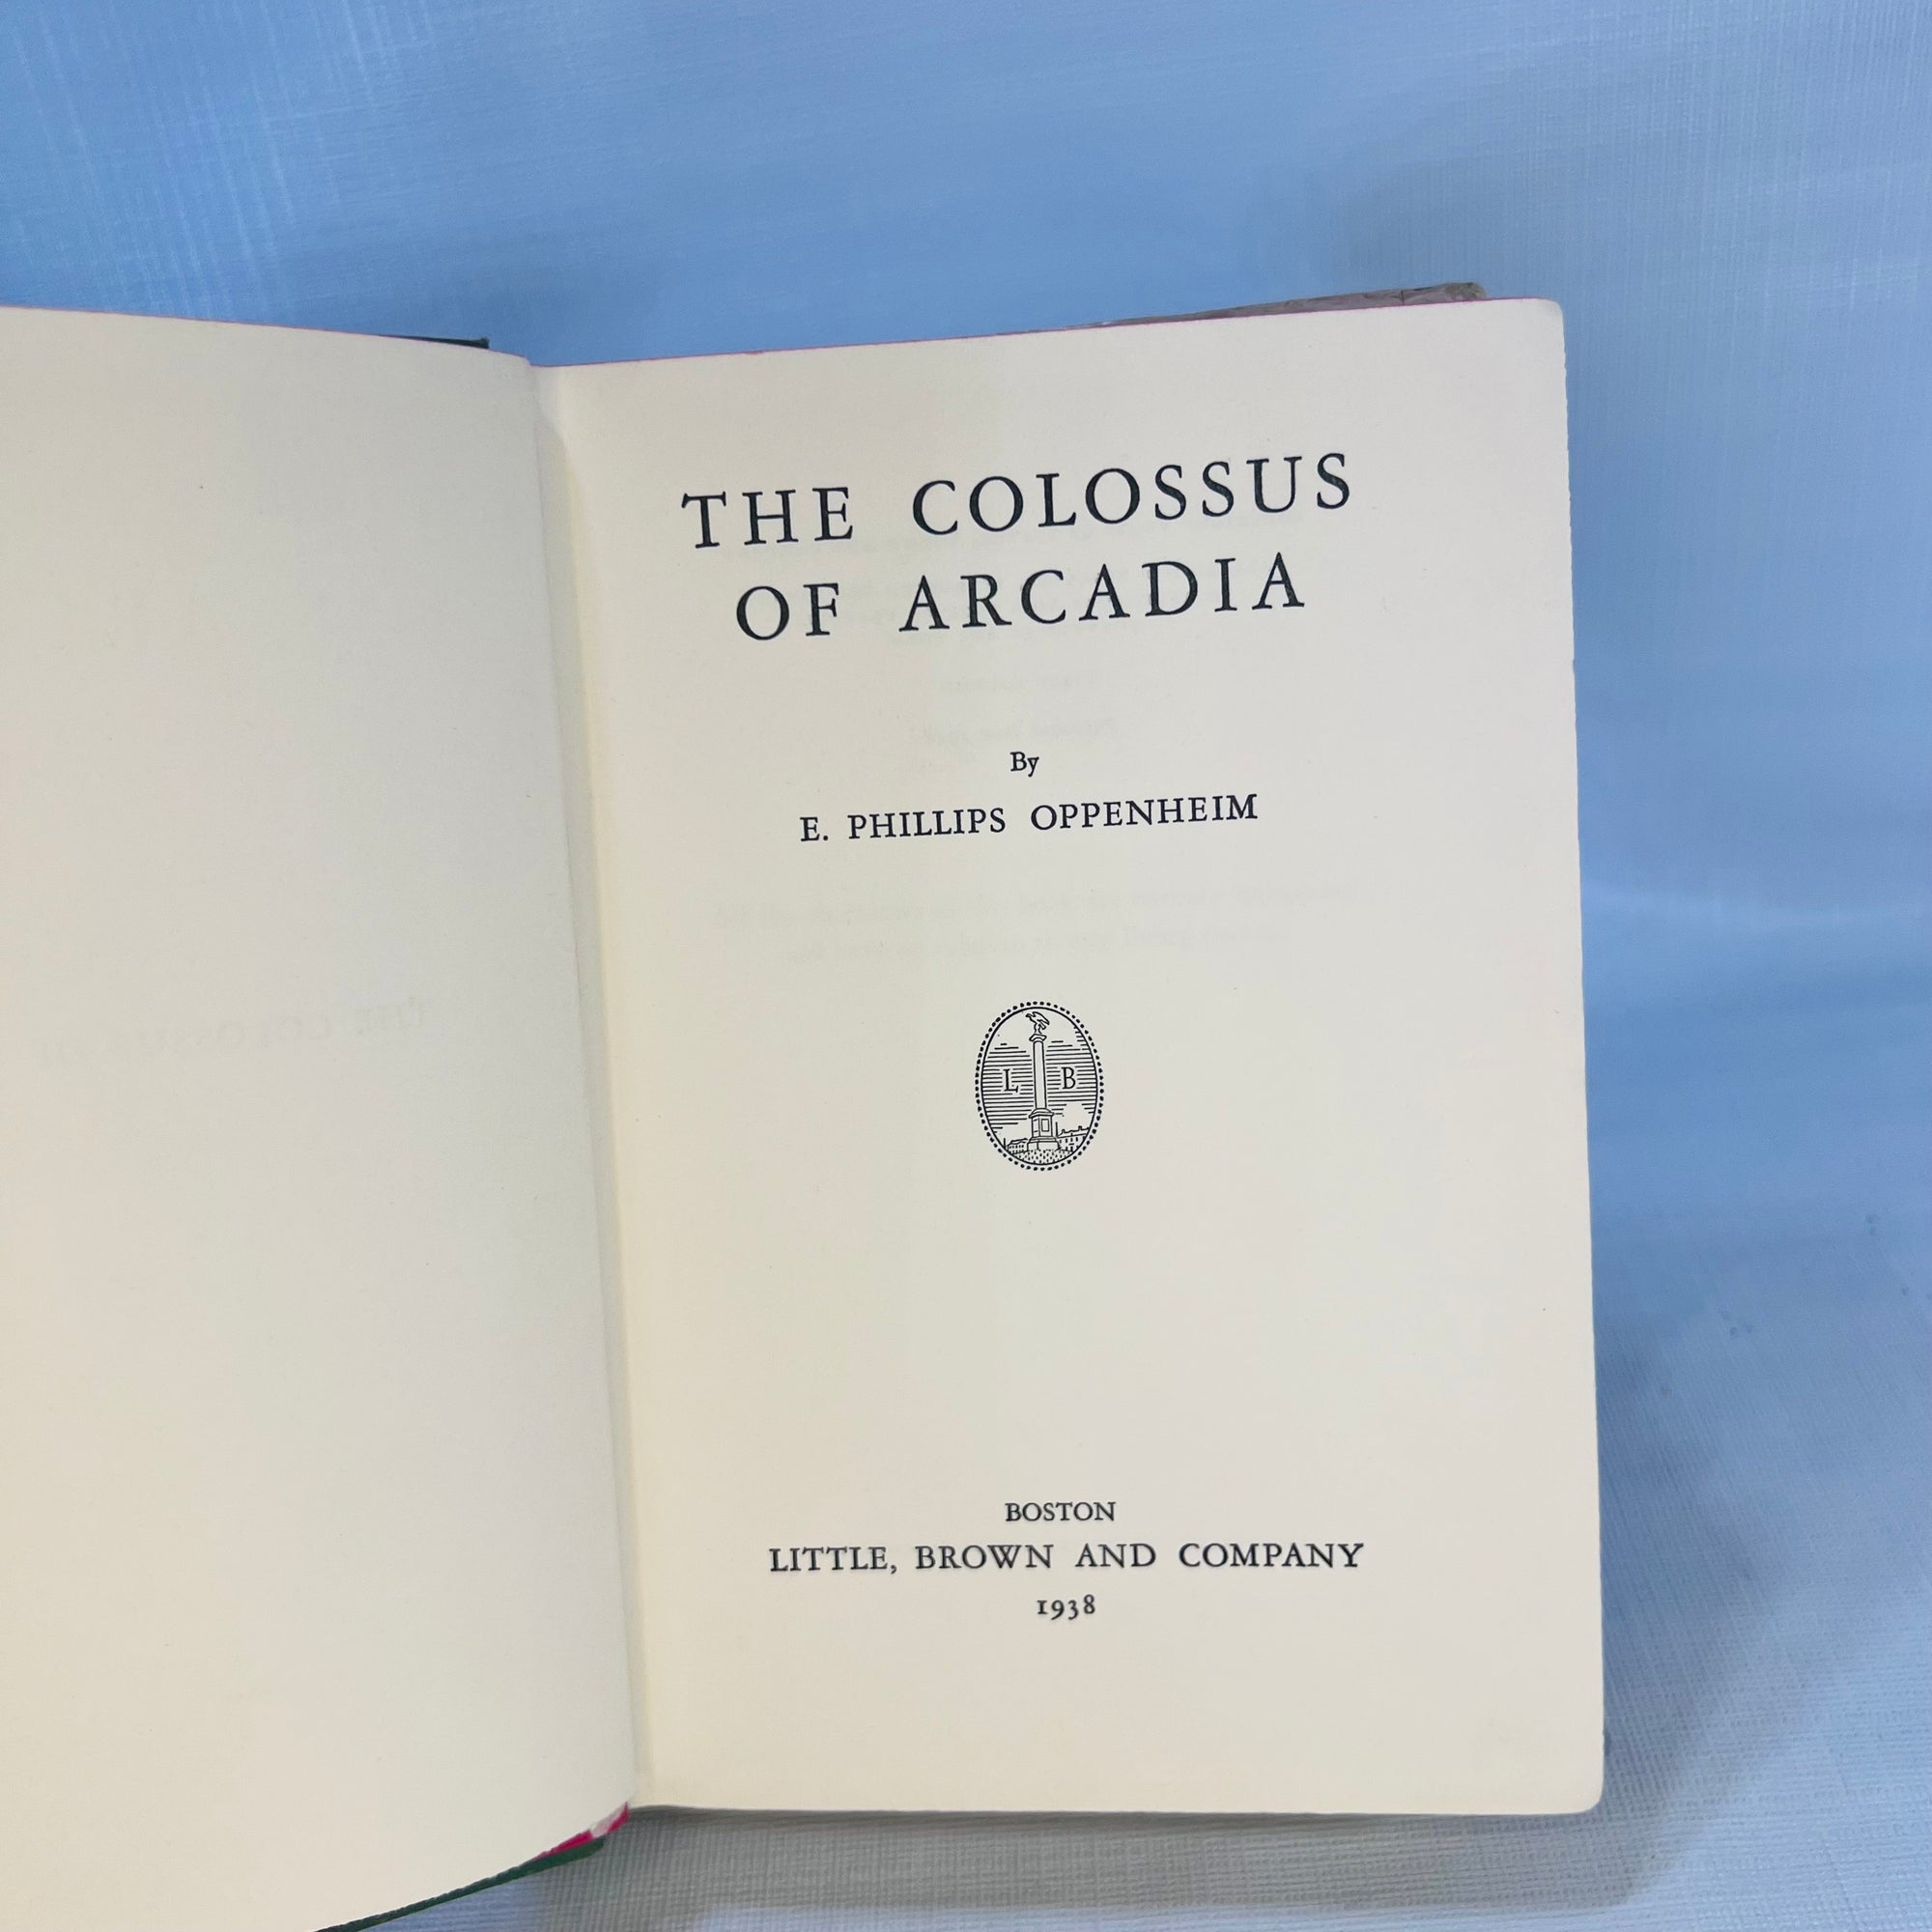 The Colossus of Ardcadia by E. Philips Oppenheim 1938 First Edition Publshed by Little Brown & Company